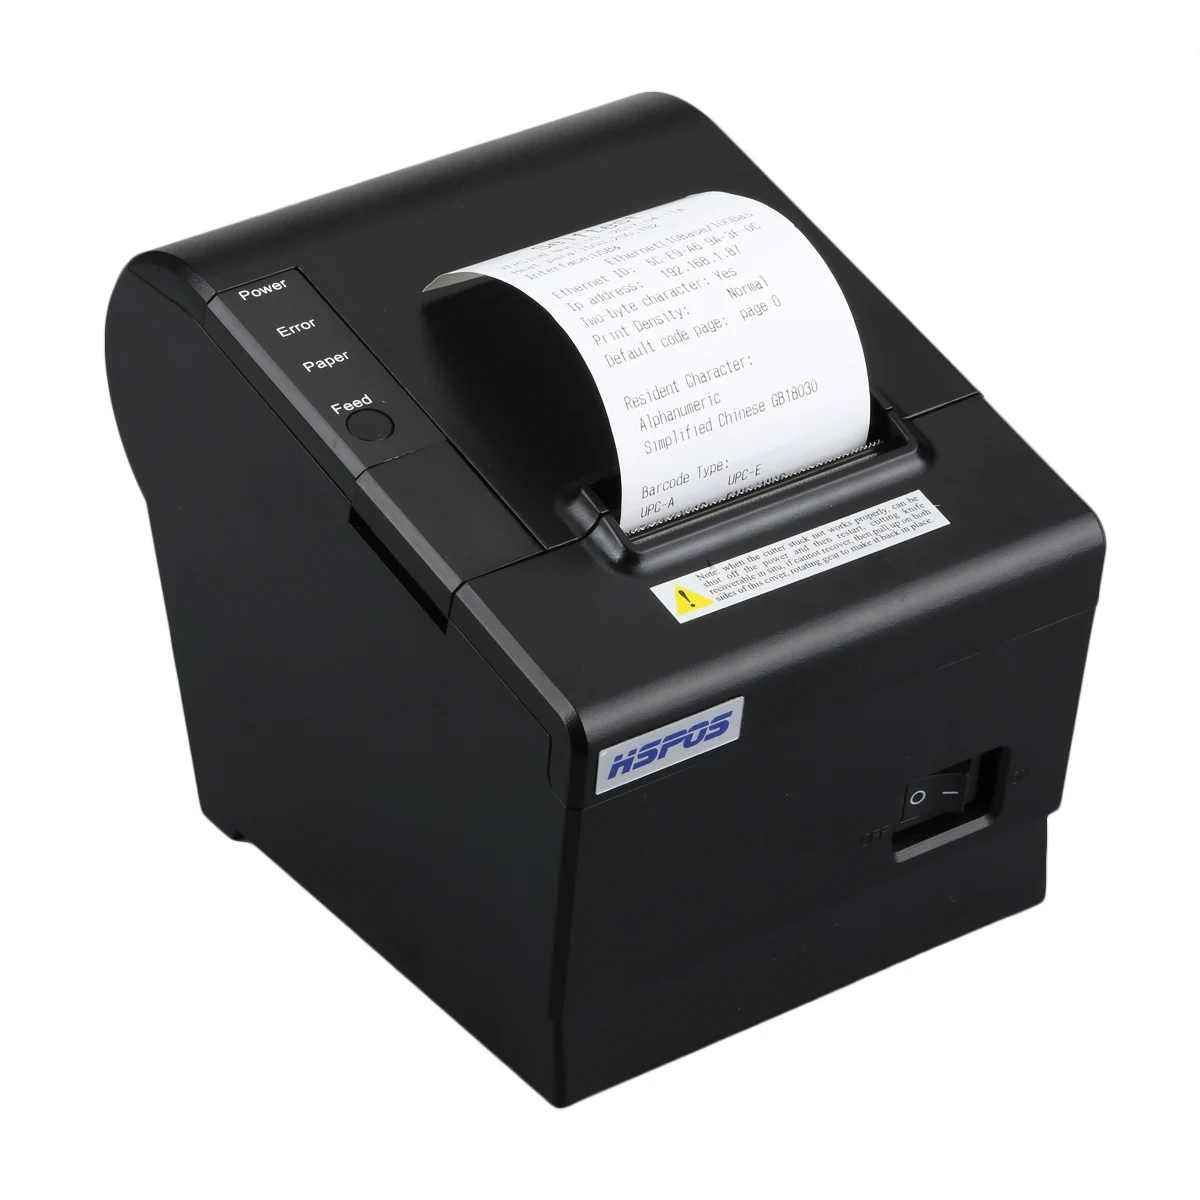 

HS-C58CULWG 2 inch Thermal Receipt Printer USB lan WiFi gprs with cutter POS systems Support Windows free sdk driver